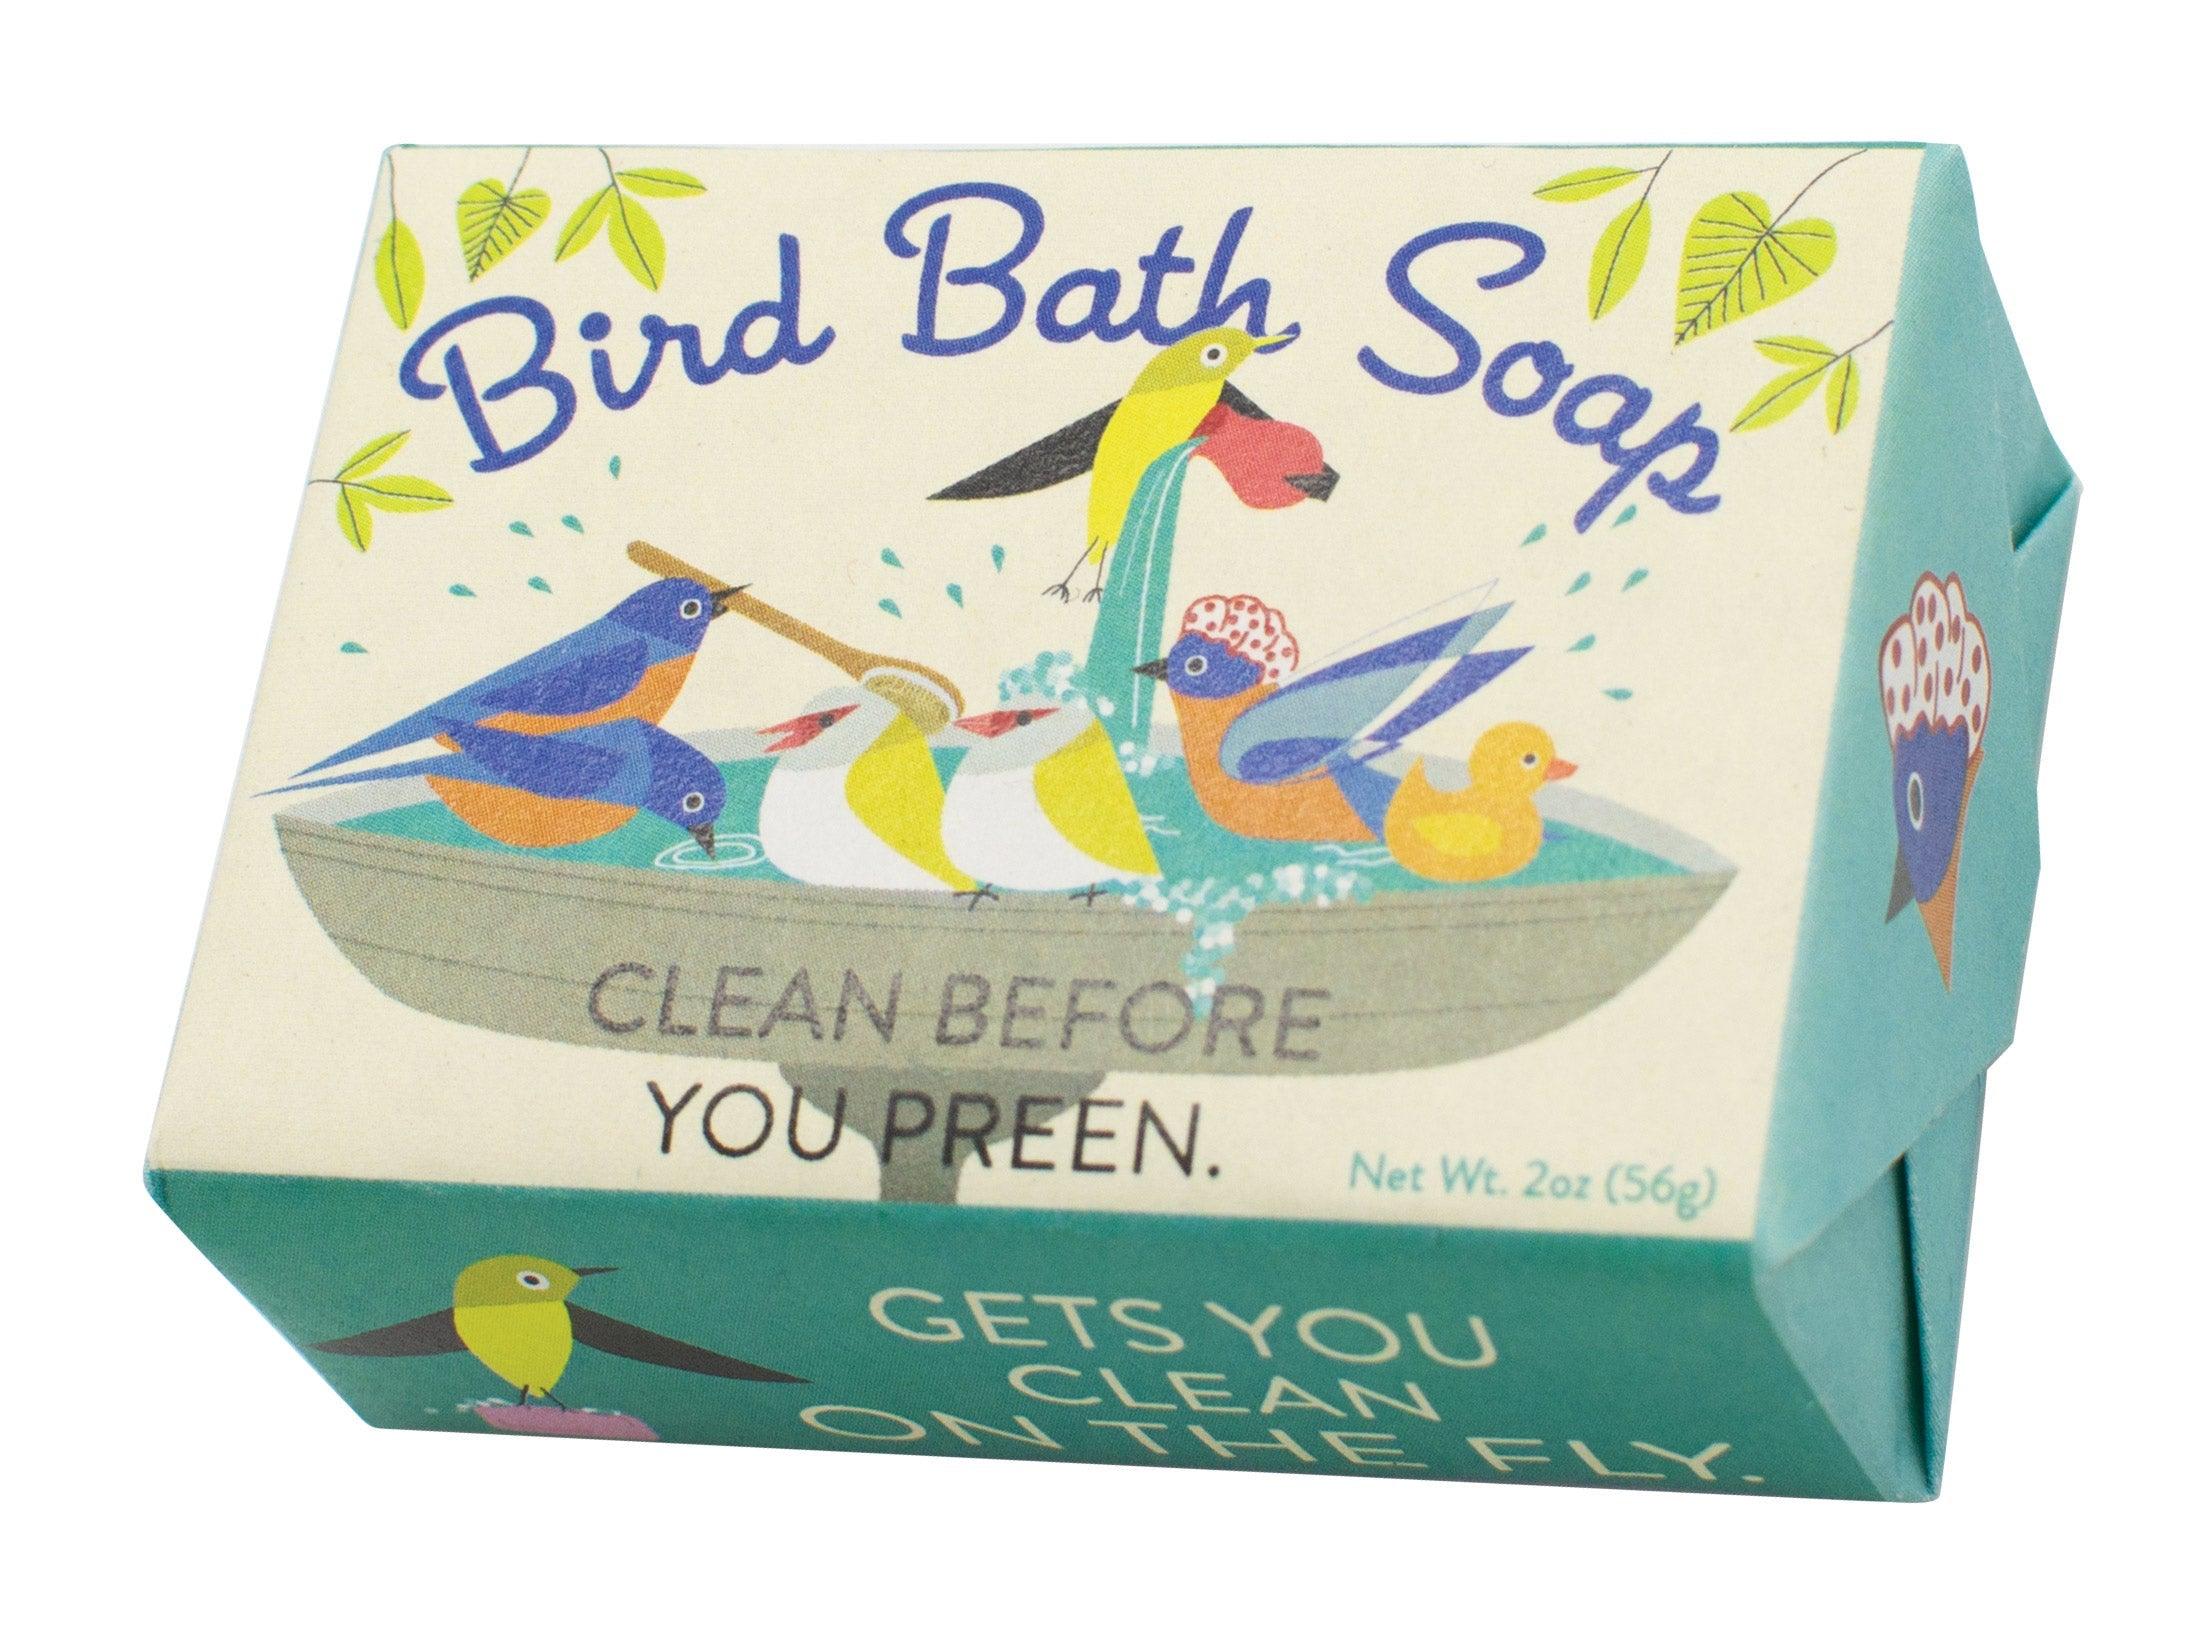 Product photo of Bird Bath Soap, a novelty gift manufactured by The Unemployed Philosophers Guild.